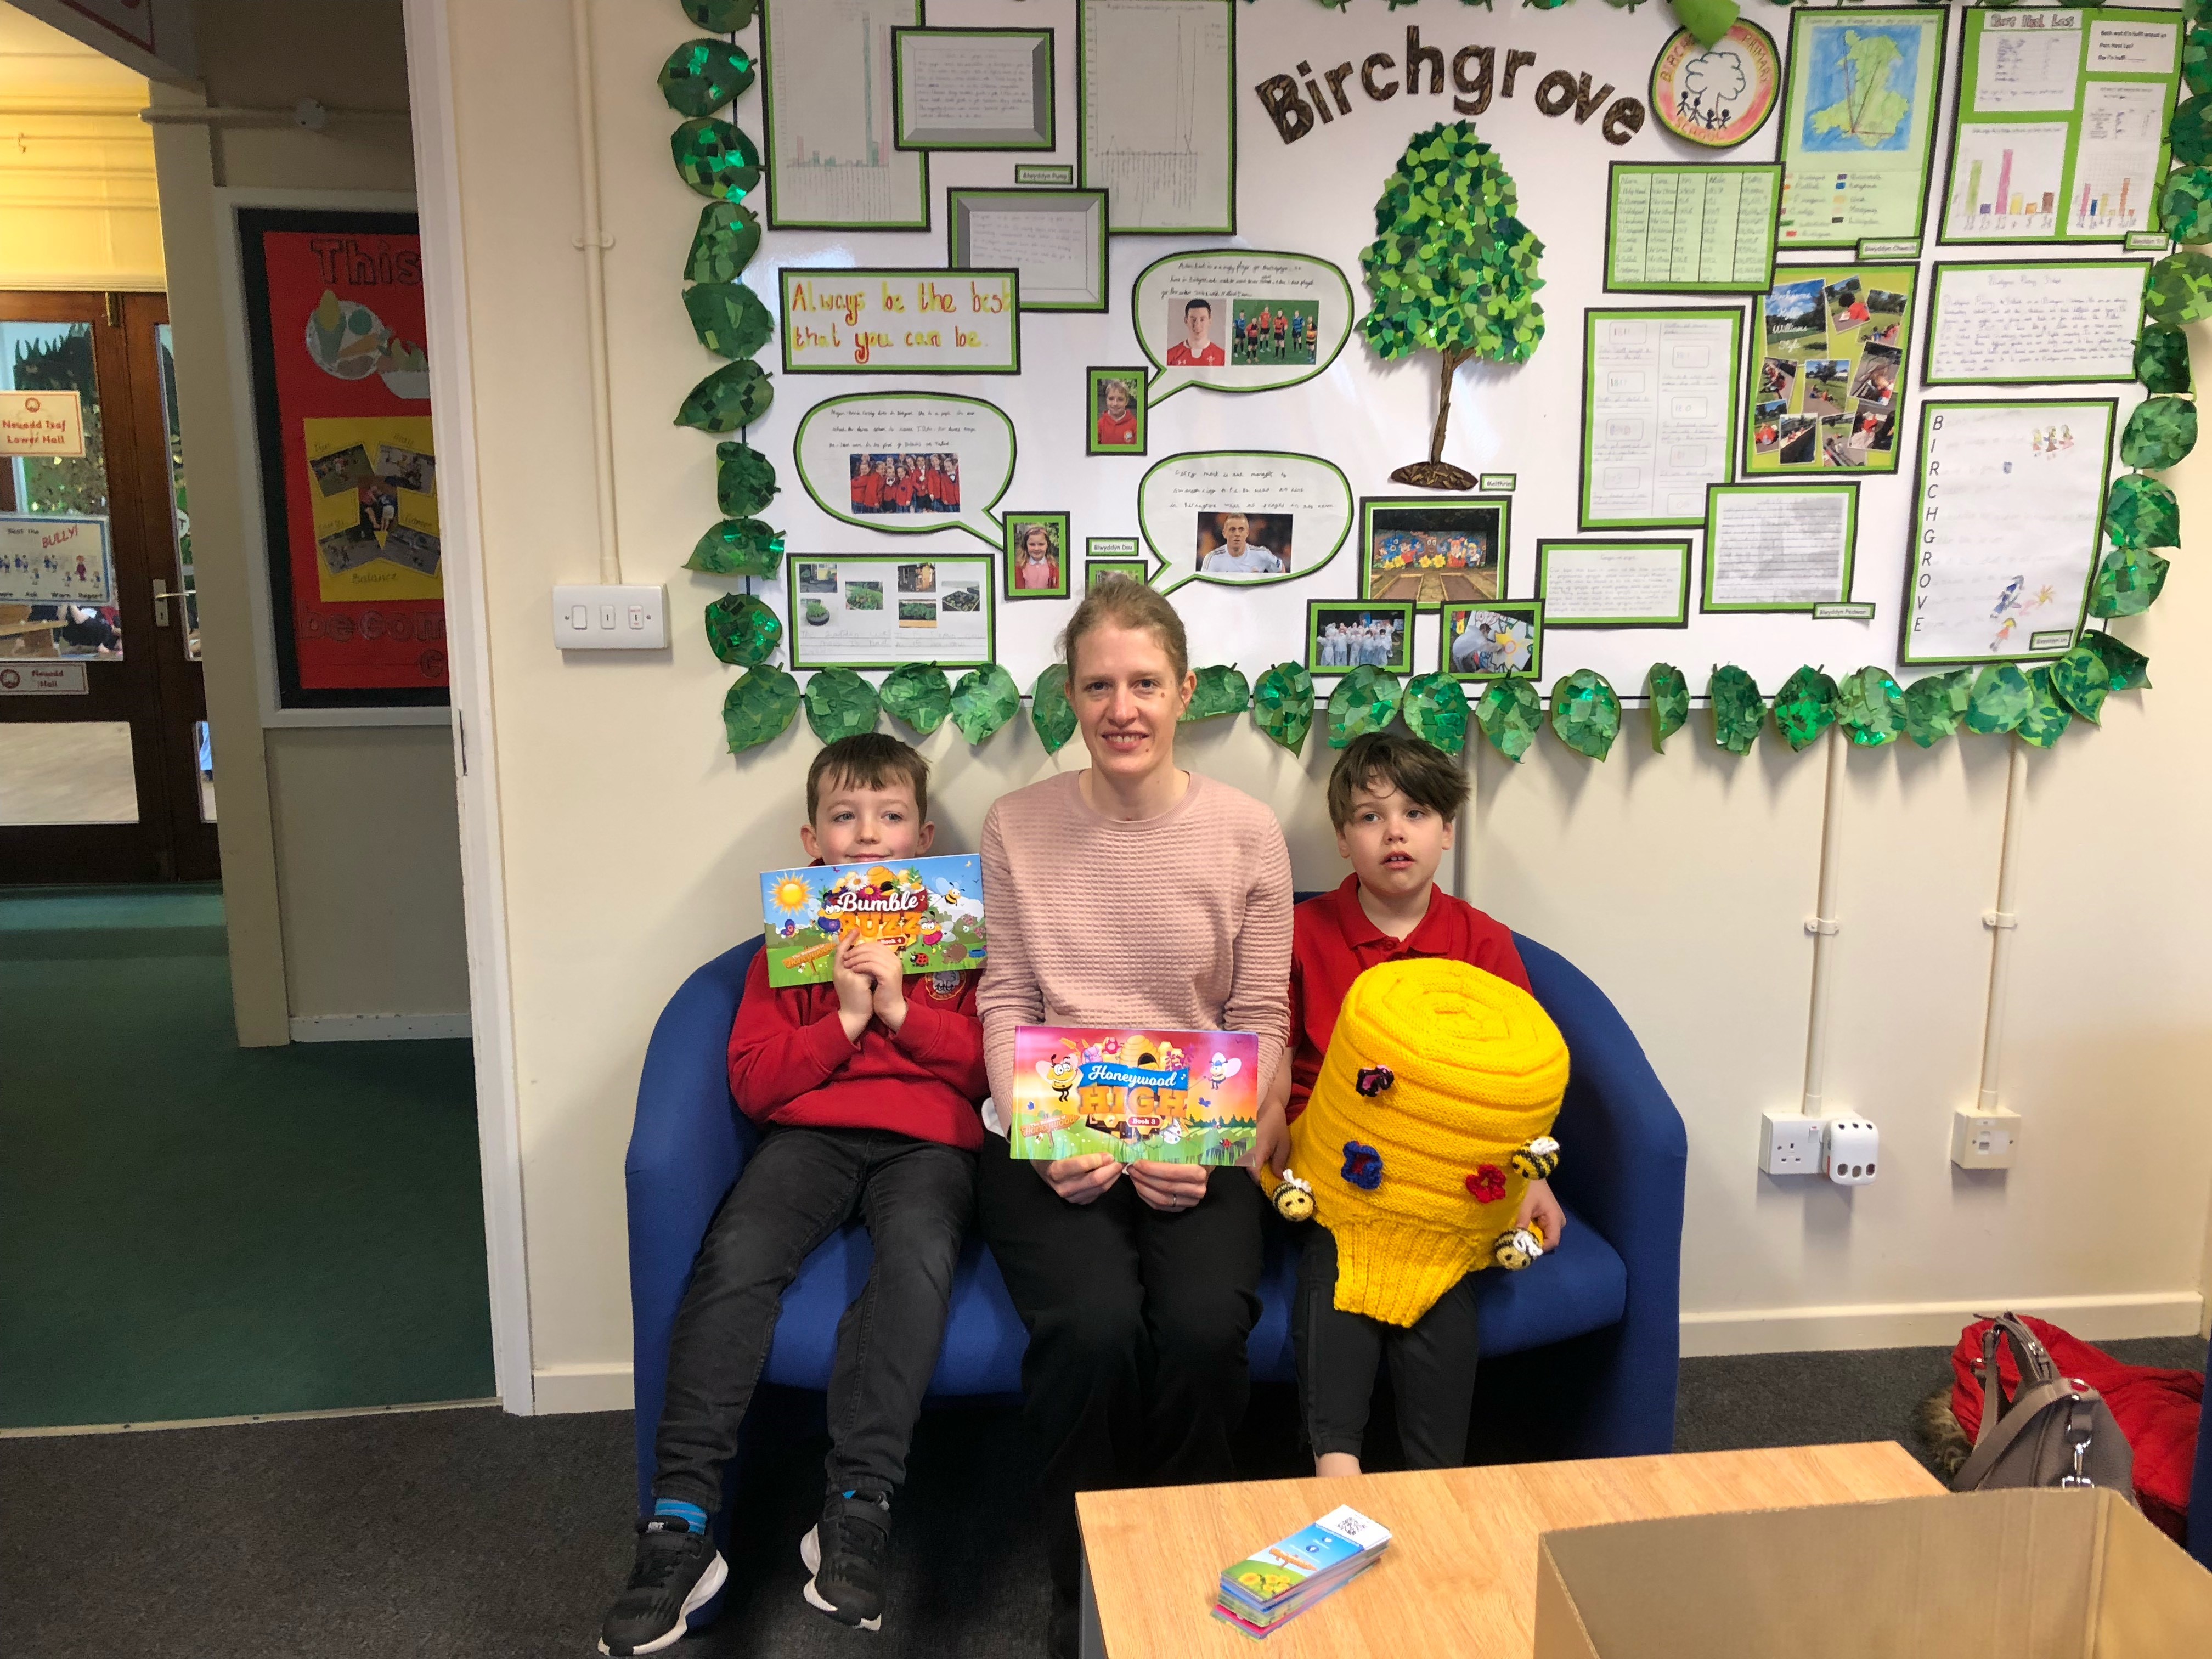 Wolfestone staff member with children at a Swansea school Bumbles of Honeywood project